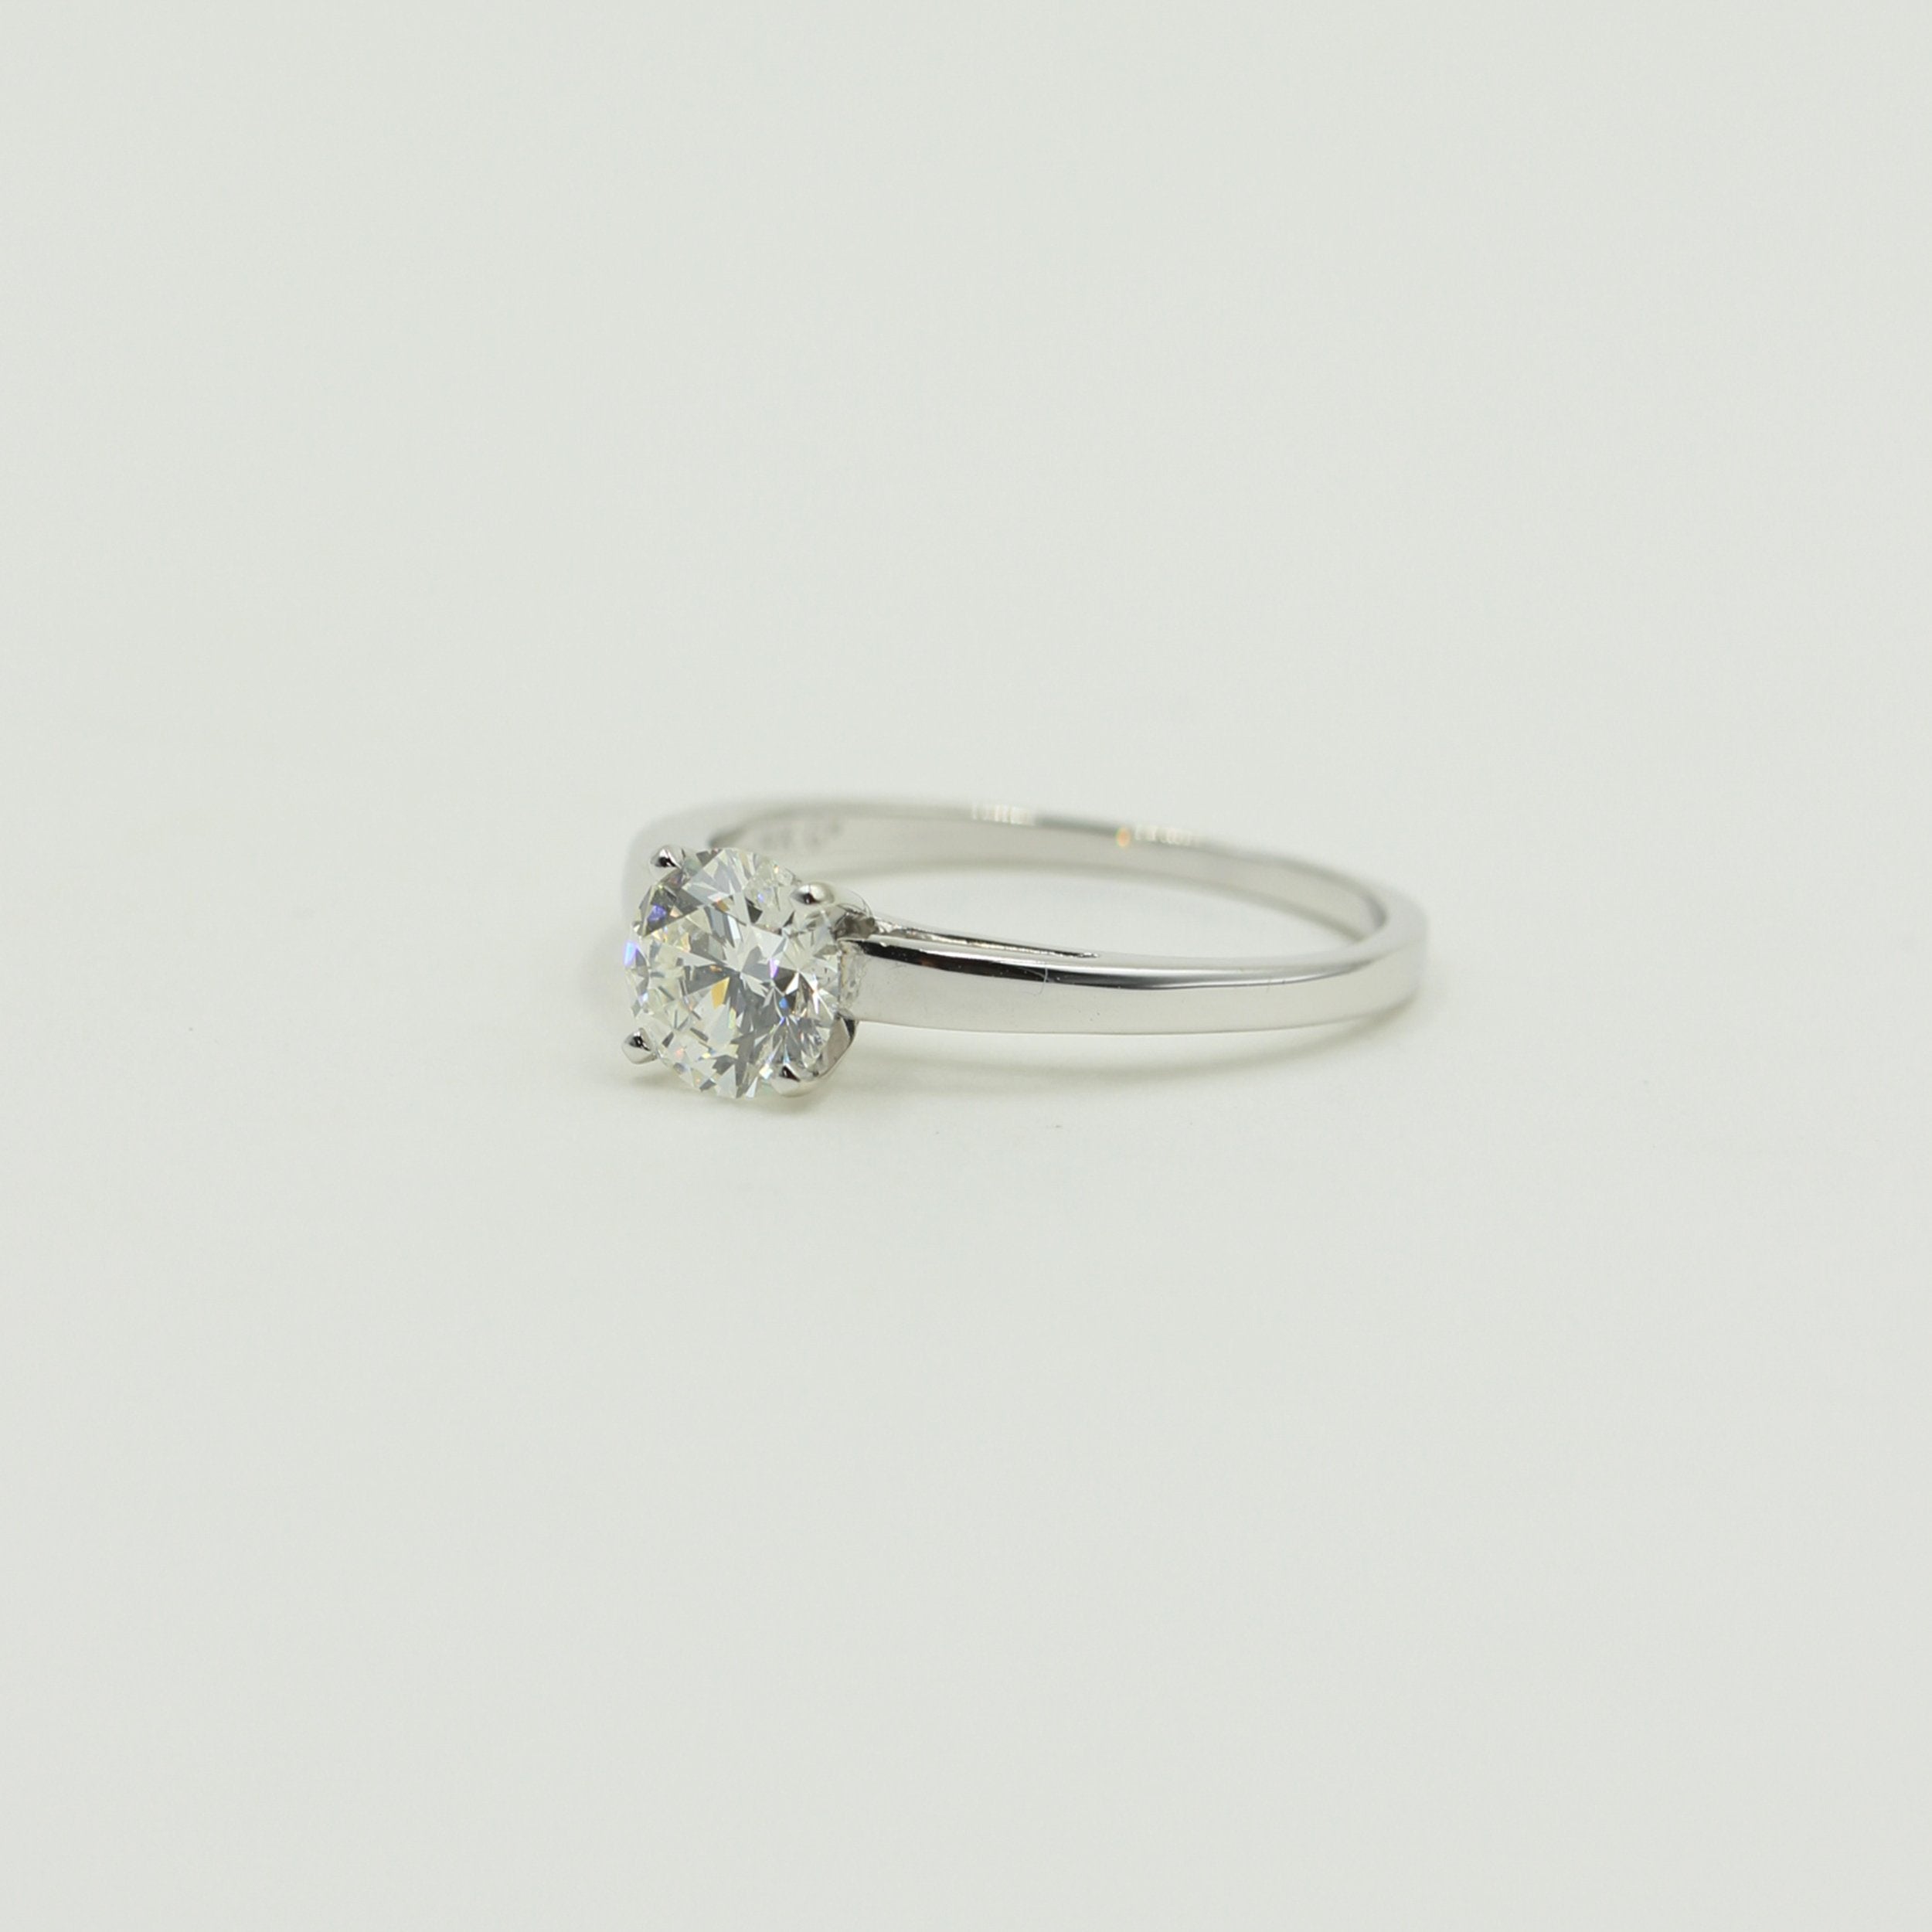 Solitairering m. 1,10 ct. G.VVS2